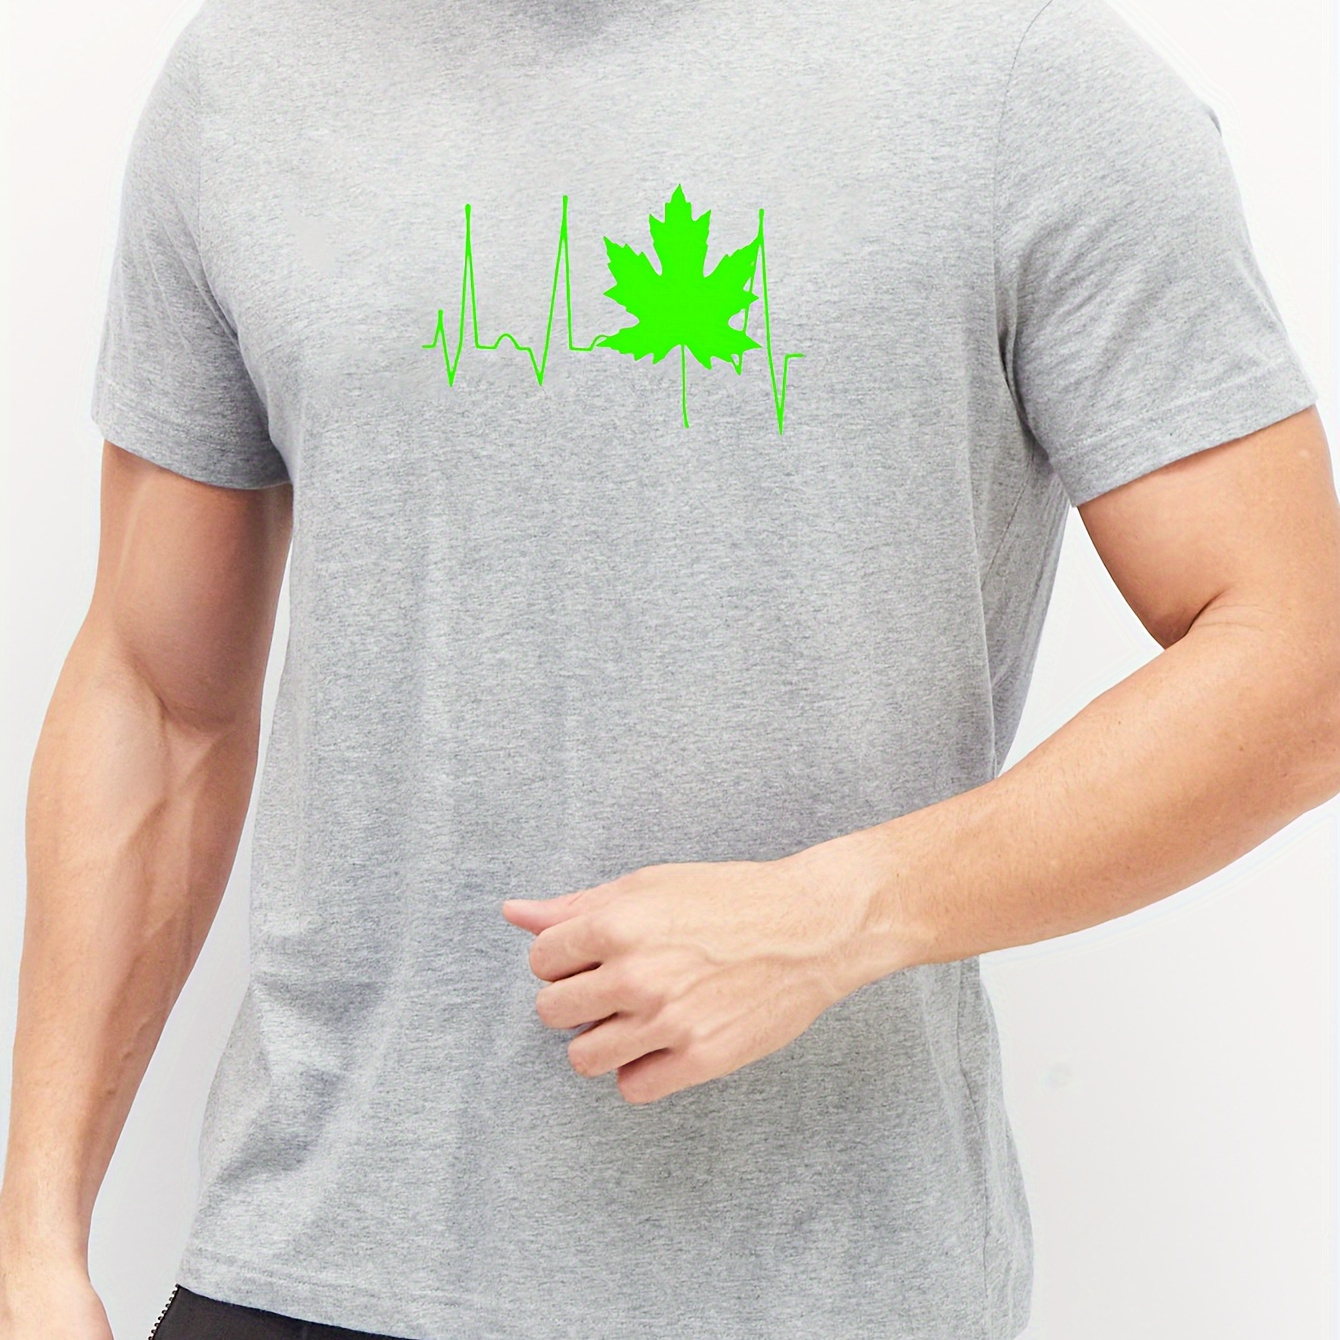 

Heartbeat And Maple Leaf Graphic Print T-shirt, Stylish And Breathable Street , Simple Comfy Cotton Top, Casual Crew Neck Short Sleeve T-shirt For Summer